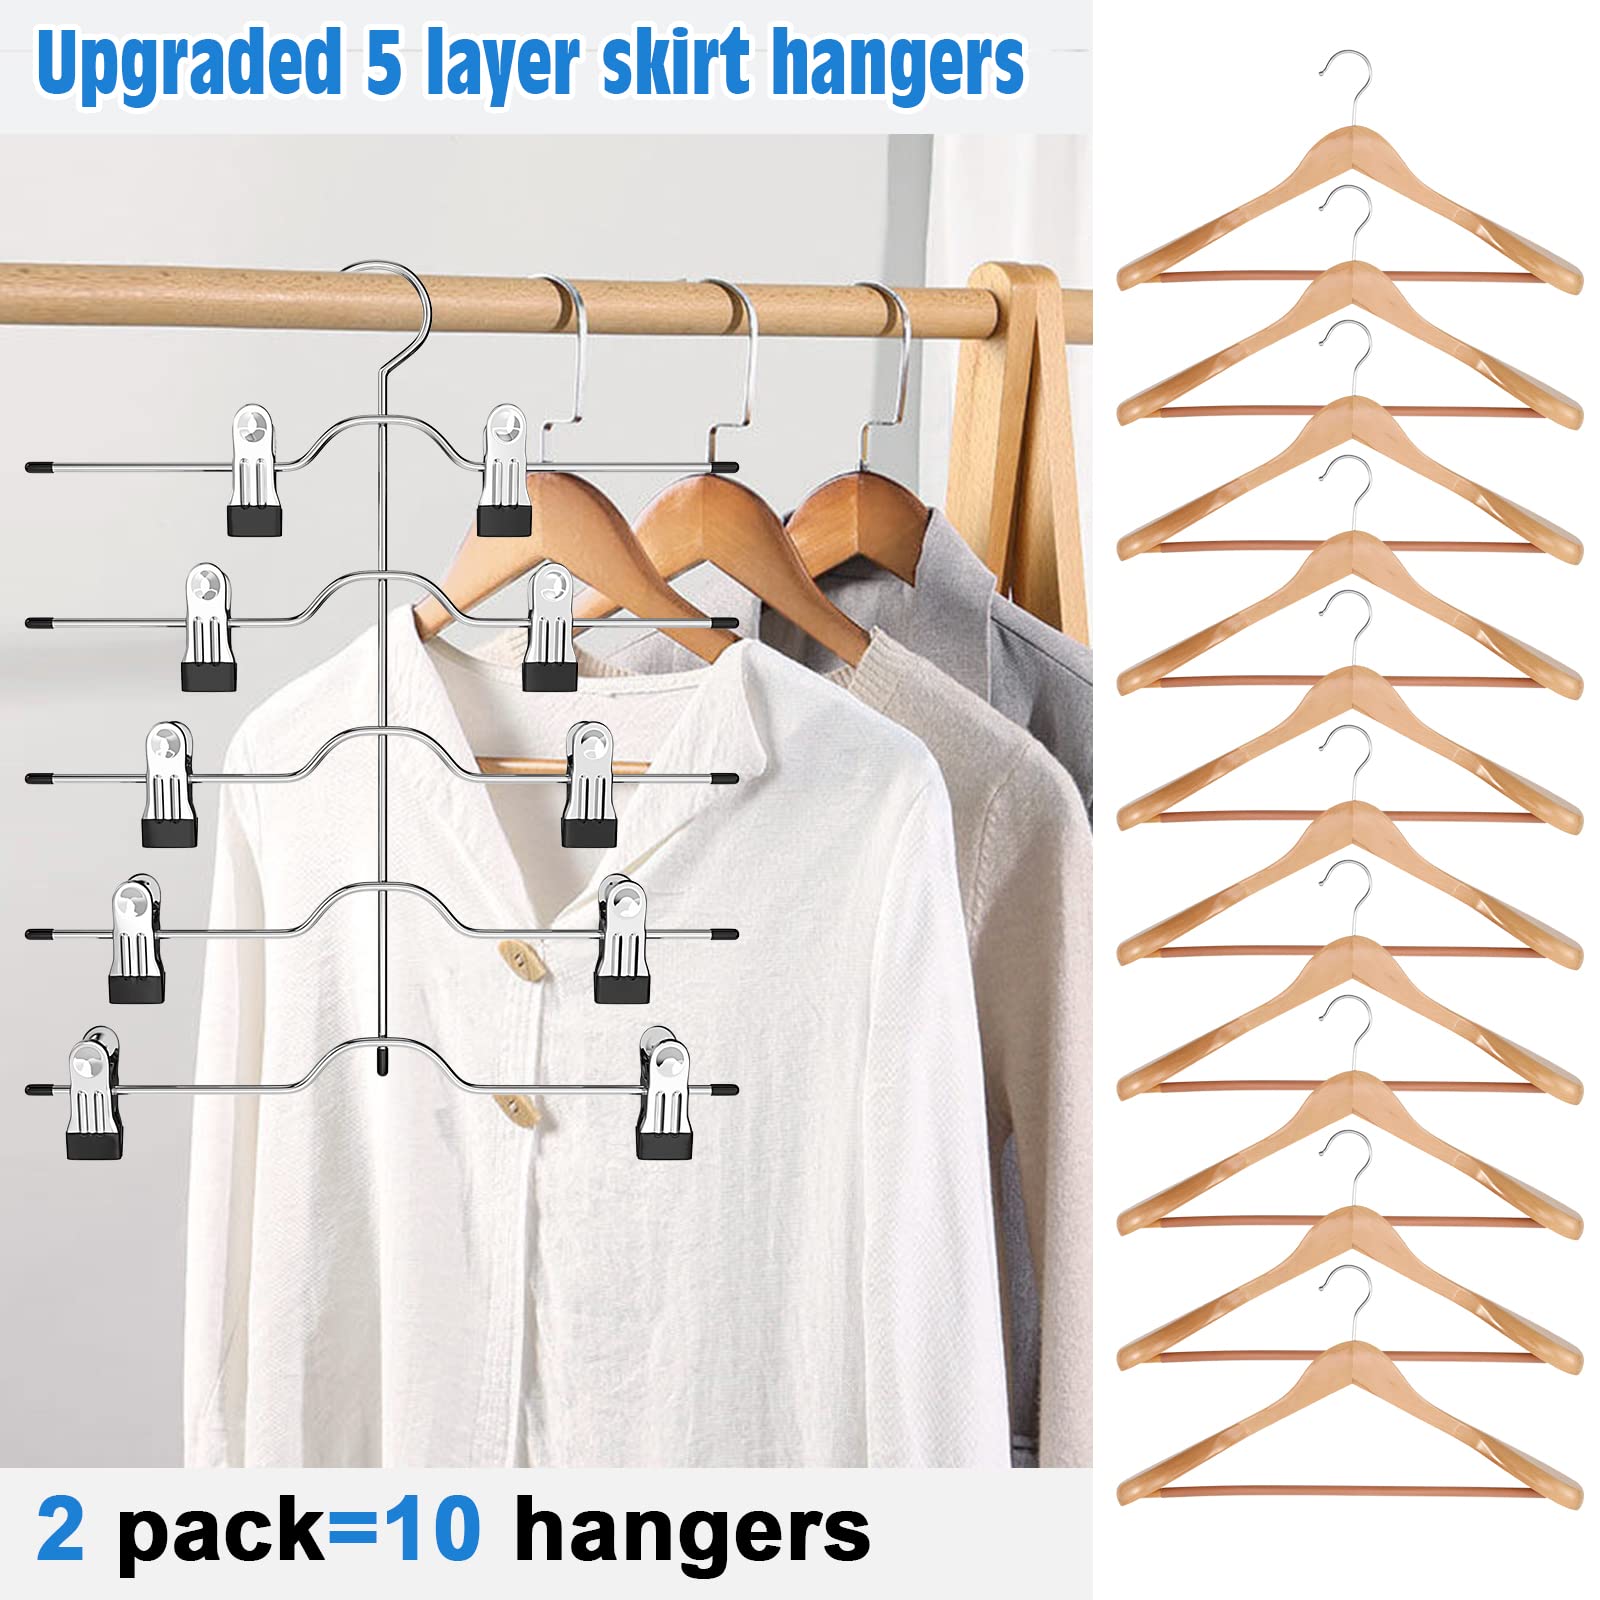 Besslly Pants Skirt Hangers with Clips, 2 Pack Pant Hangers Skirt Hangers Space Saving Closet Hanger Organizer Closet Organizers and Storage